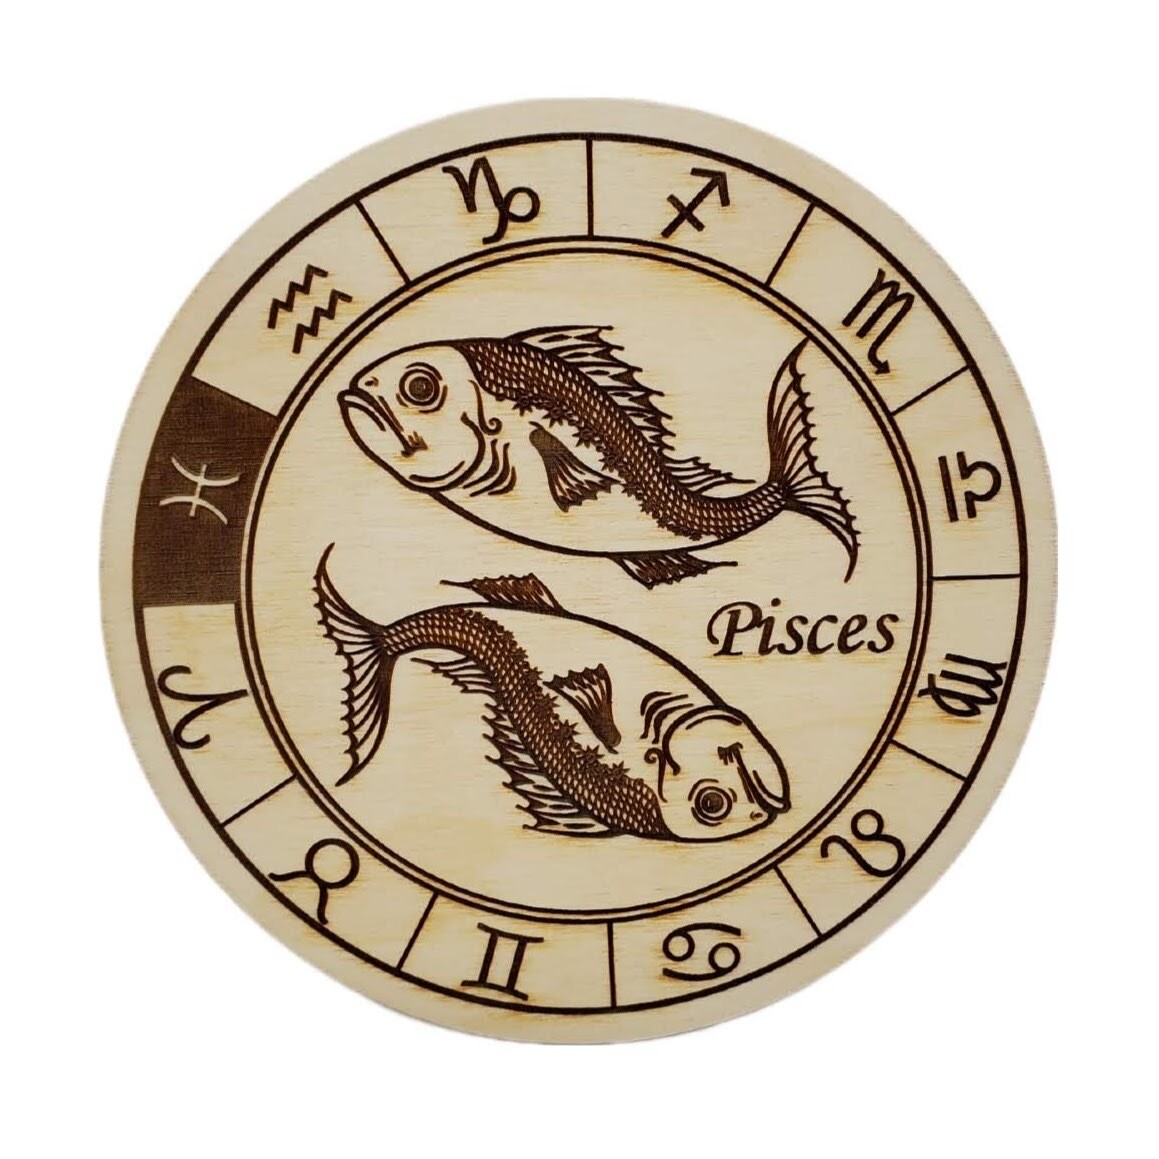 ENGRAVED PISCES PLATE